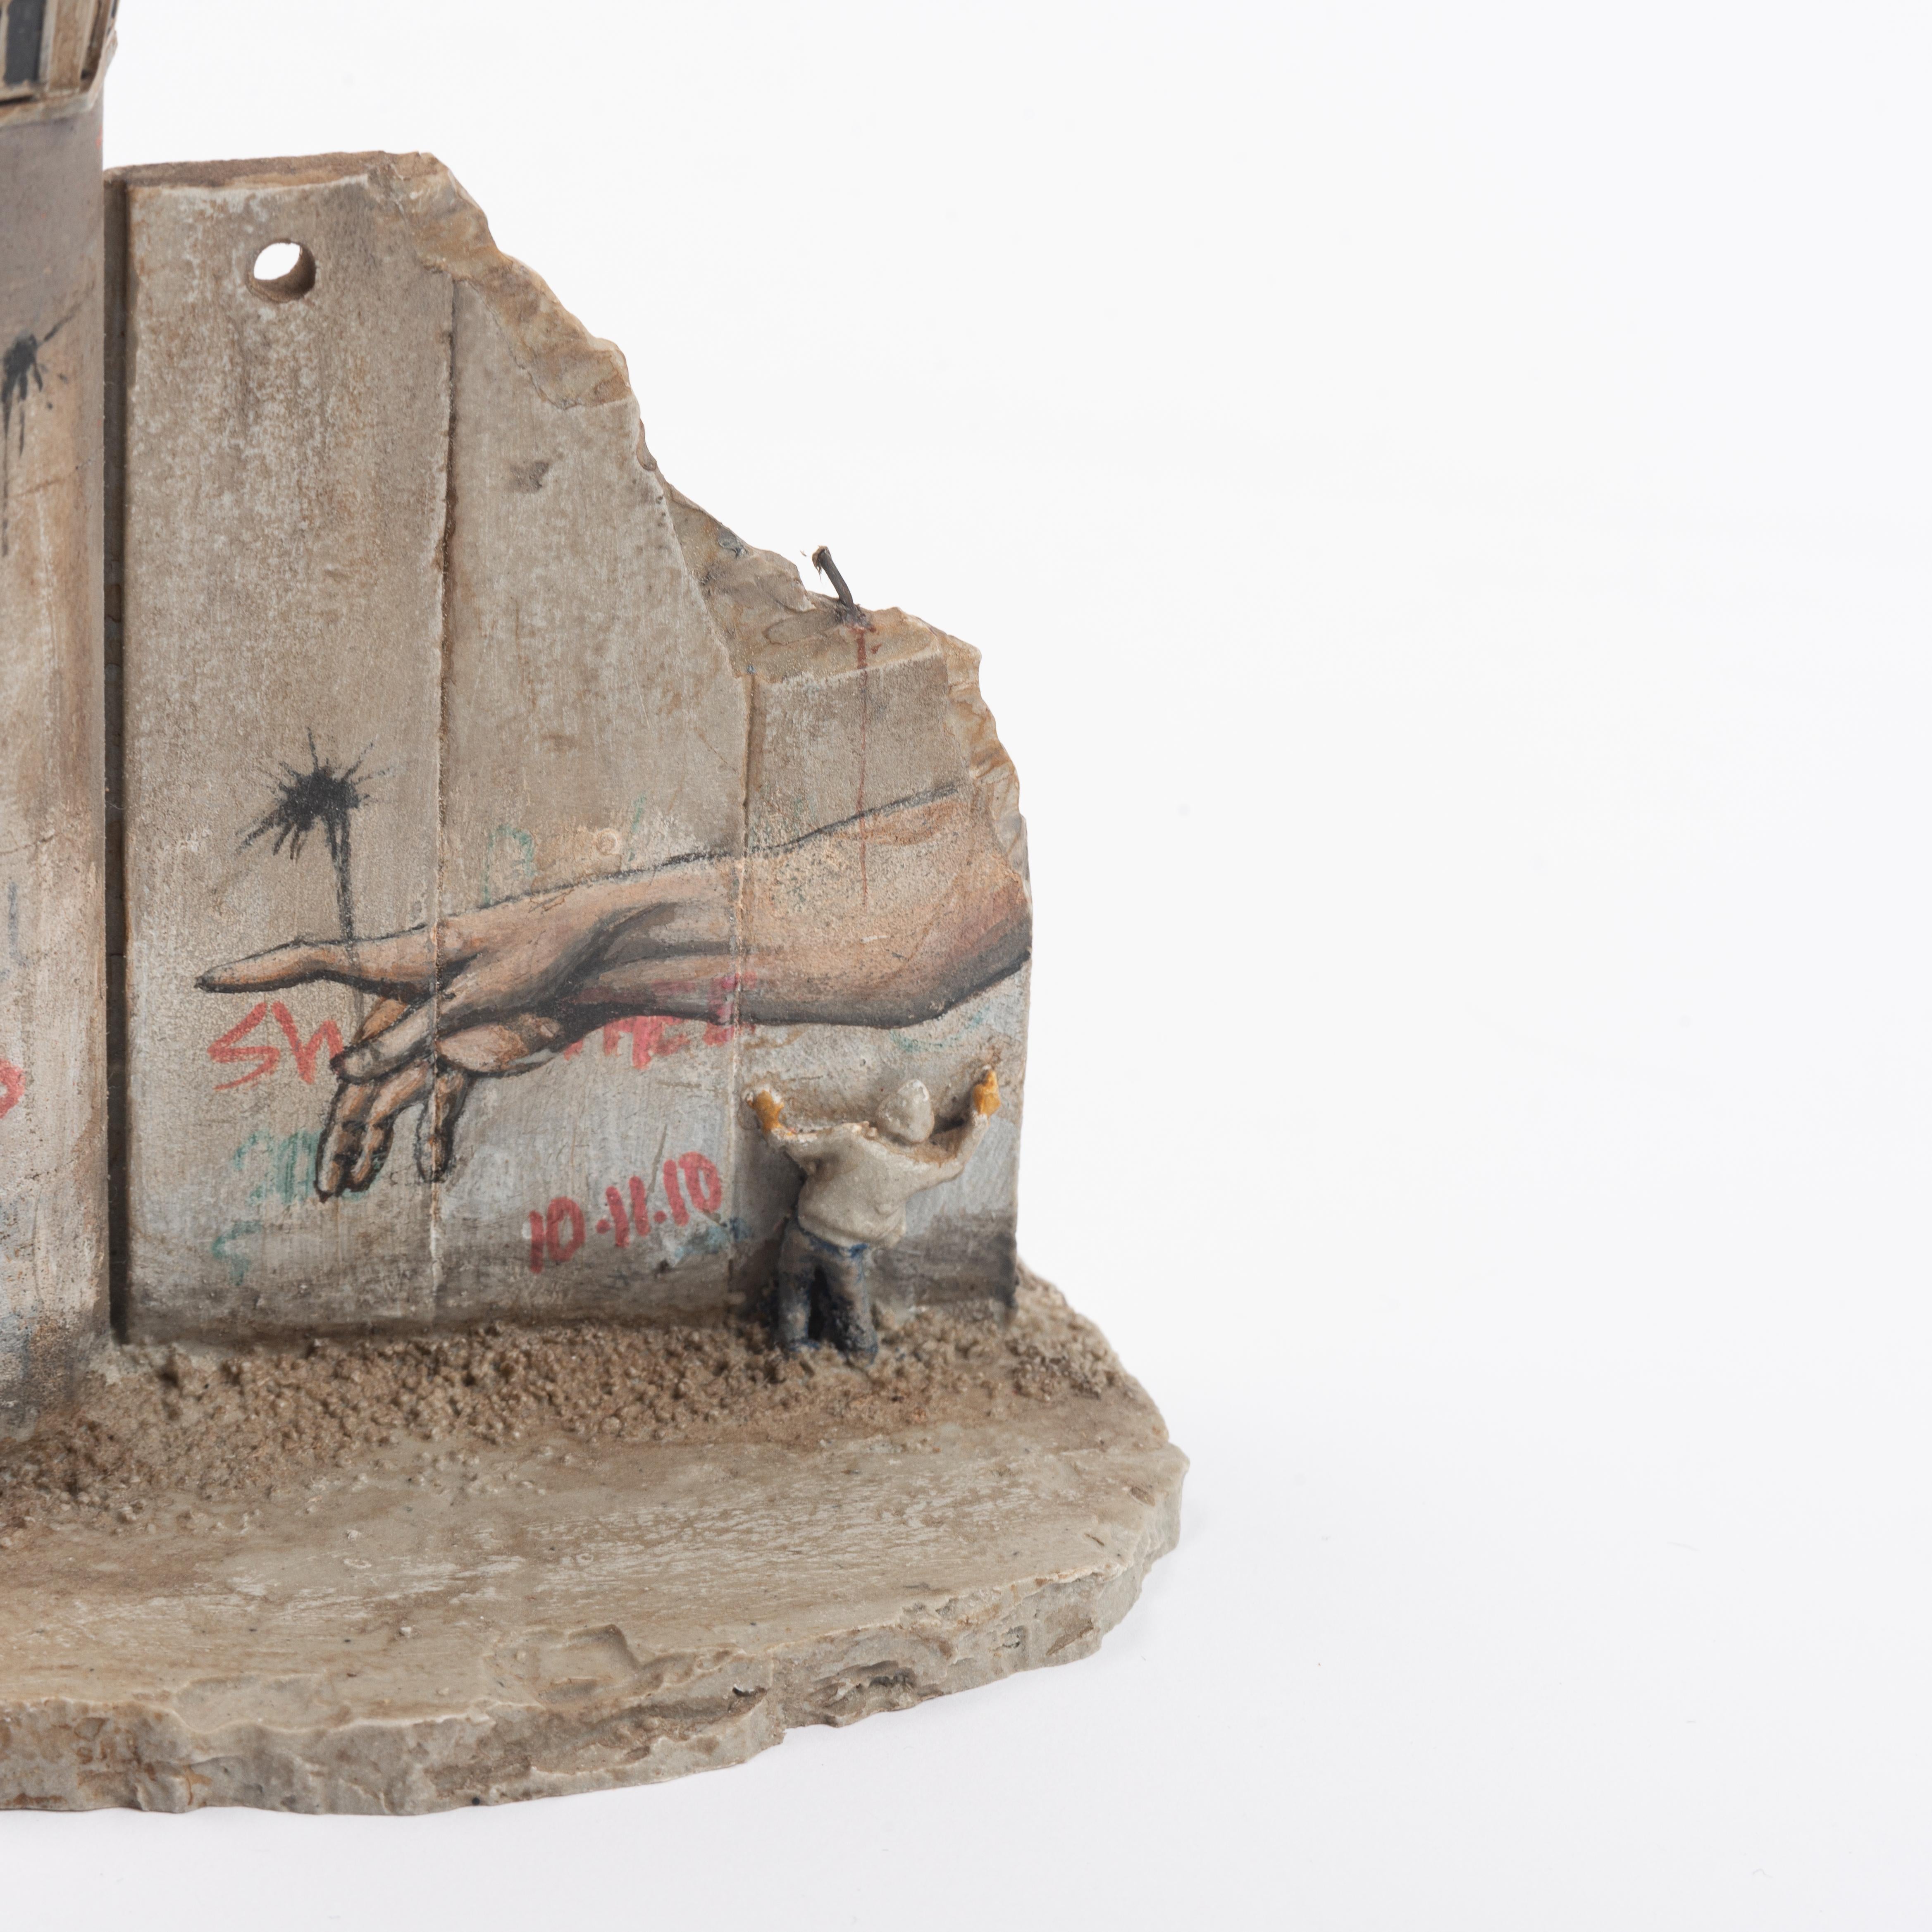 Miniature concrete souvenir sculpture, hand-painted by local artists 
Open Edition
Unsigned and marked with a unique reference number on the underside
New, as issued